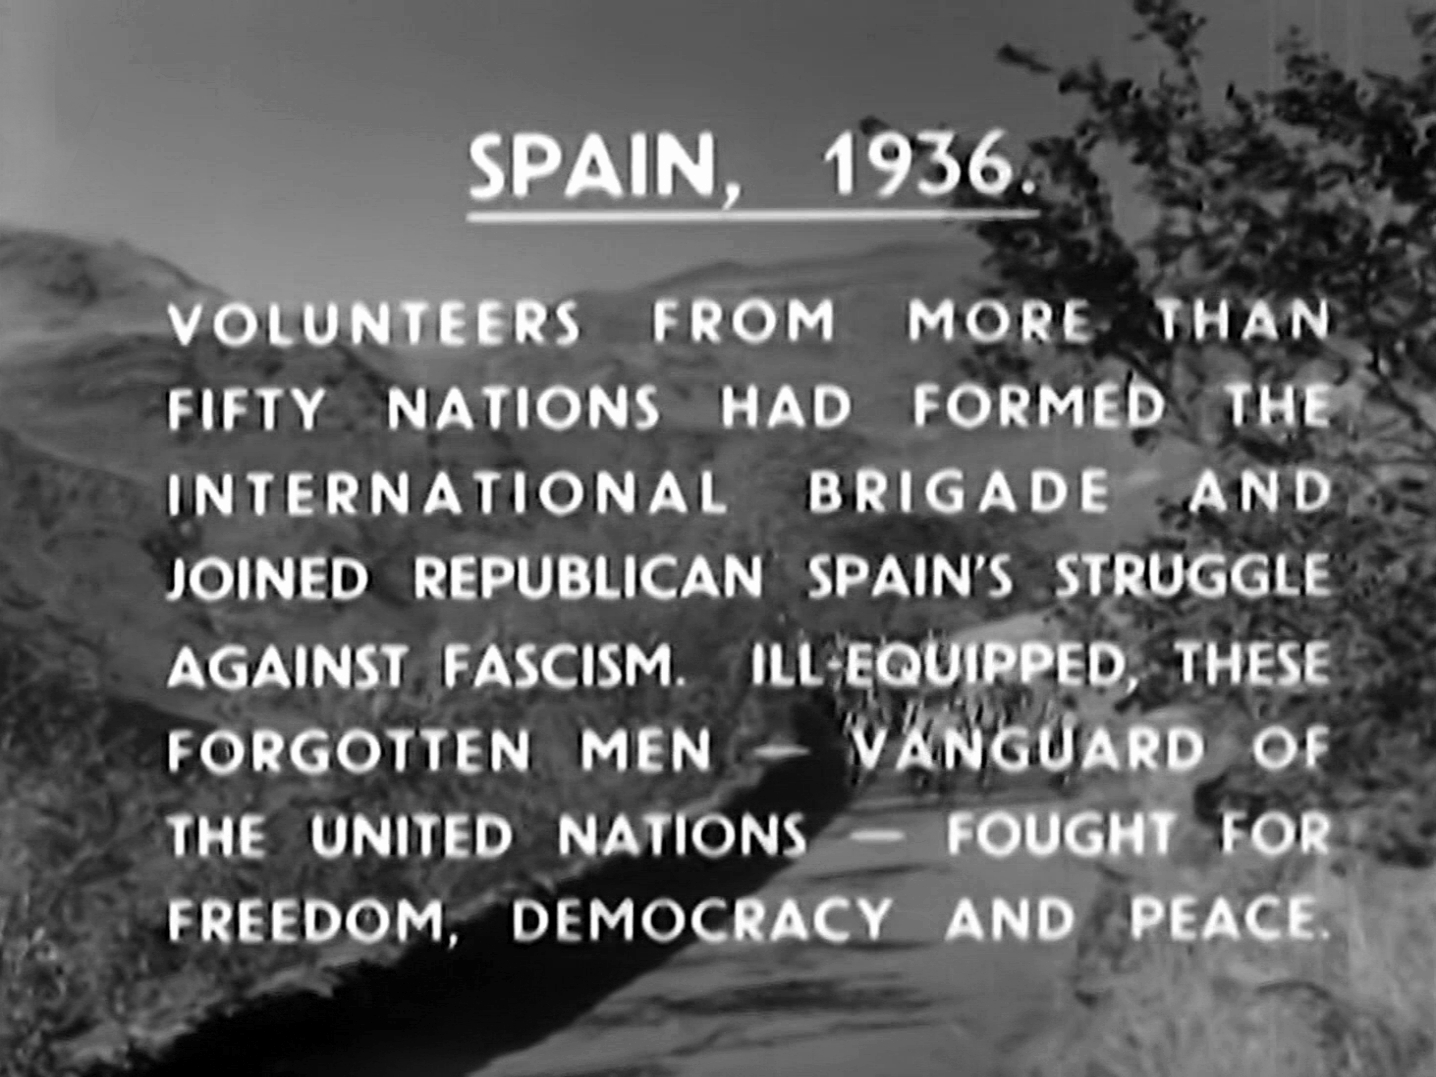 Screenshot from The Man from Morocco (1945) (1). Spain, 1936. Volunteers from more than fifty nations had formed the International Brigade and joined republican Spain’s struggle against fascism. Ill-equipped, these forgotten men – vanguard of the United Nations – fought for freedom, democracy and peace